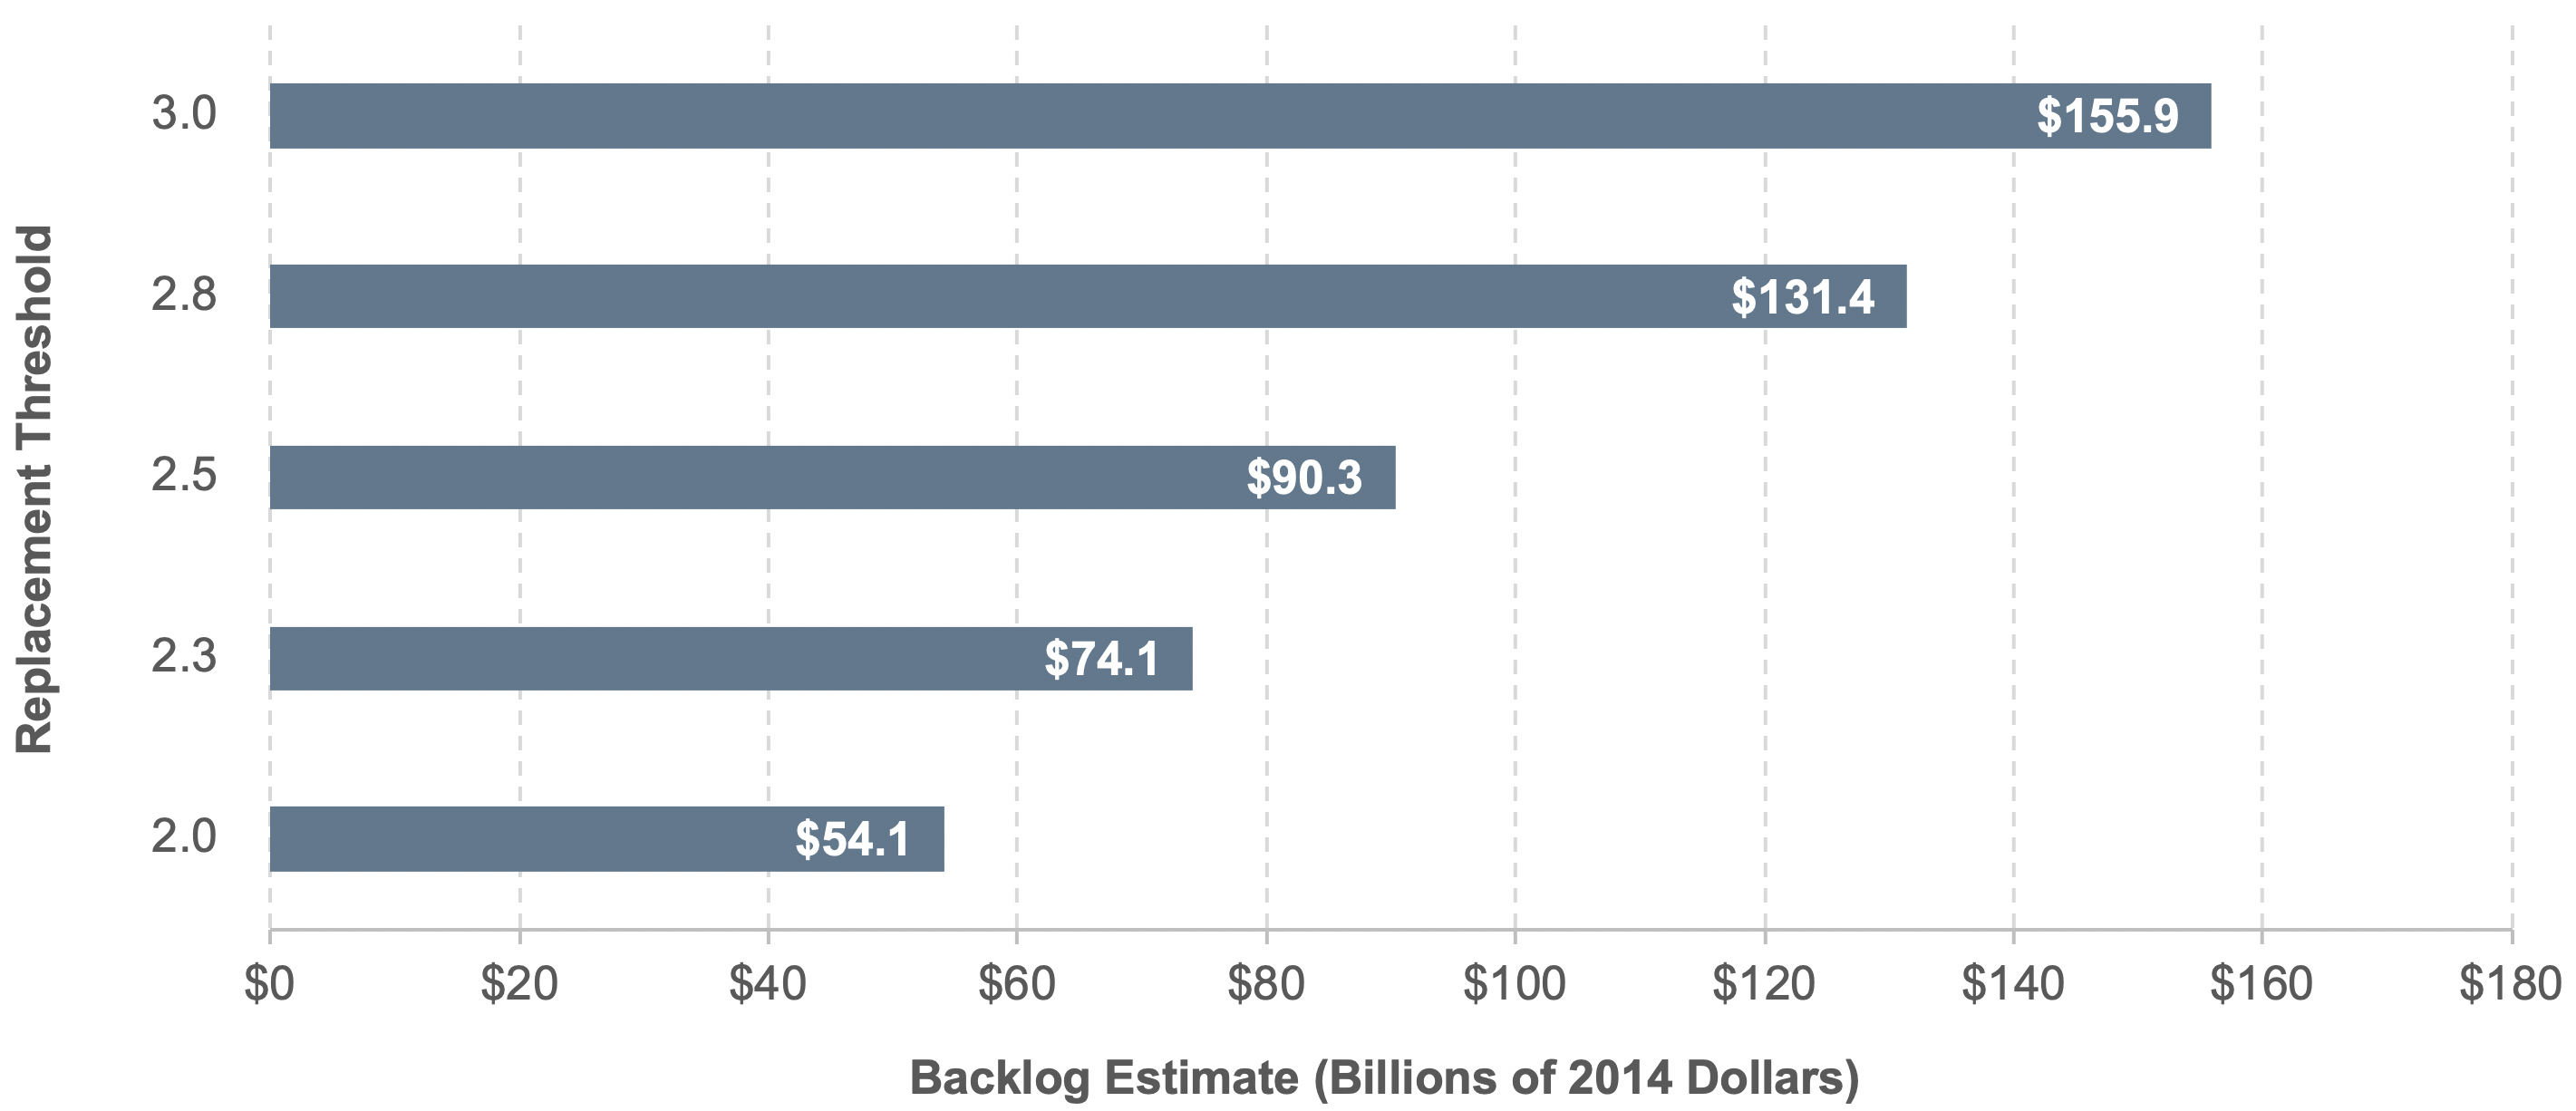 A bar chart plots the backlog estimate, in billions of 2014 dollars, for replacement thresholds. For a replacement threshold of 3.0, the backlog estimate is $155.9 billion; for 2.8, the backlog estimate is $131.4 billion; for 2.5, the backlog estimate is $90.3 billion; for 2.3, the backlog estimate is $74.1 billion; for 2.0, the backlog estimate is $54.1 billion. Source: Transit Economic Requirements Model.